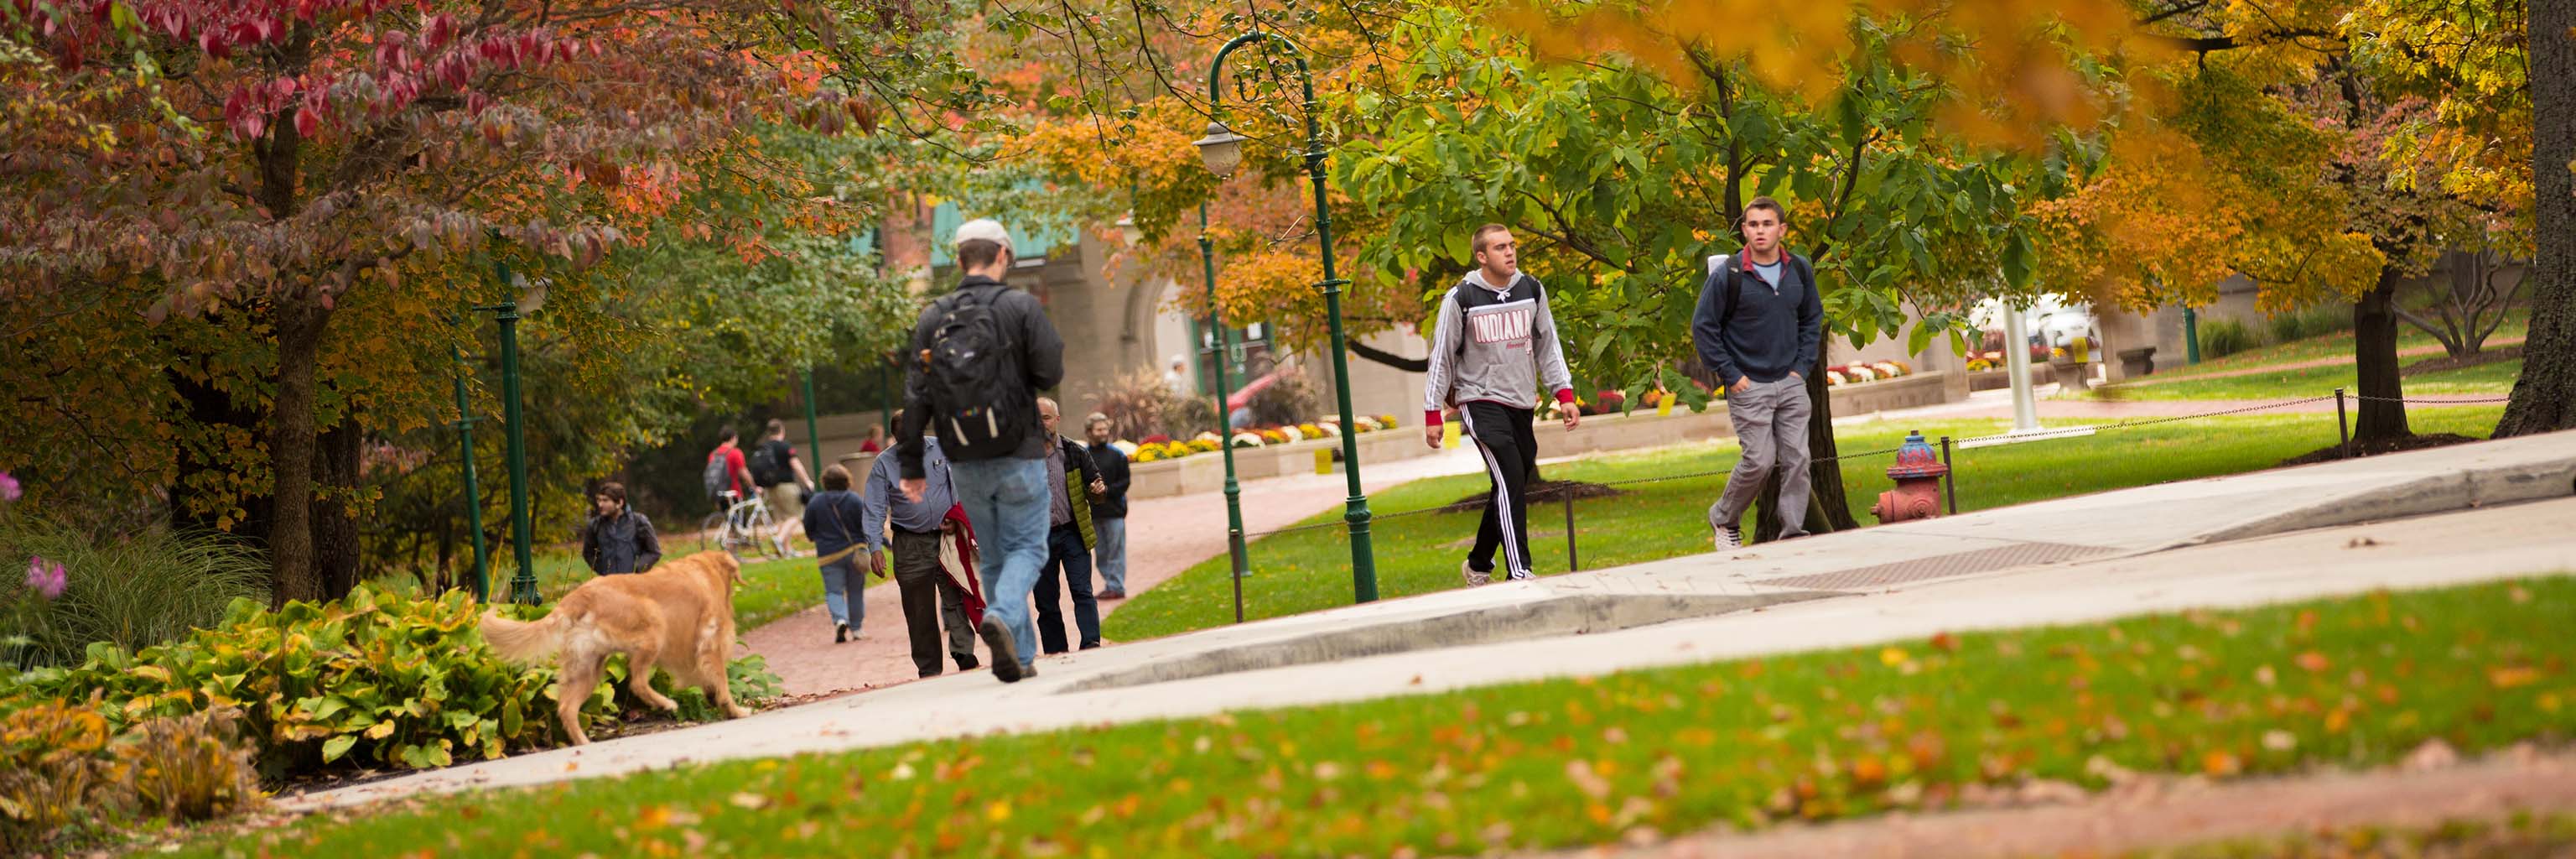 A view of students walking on campus